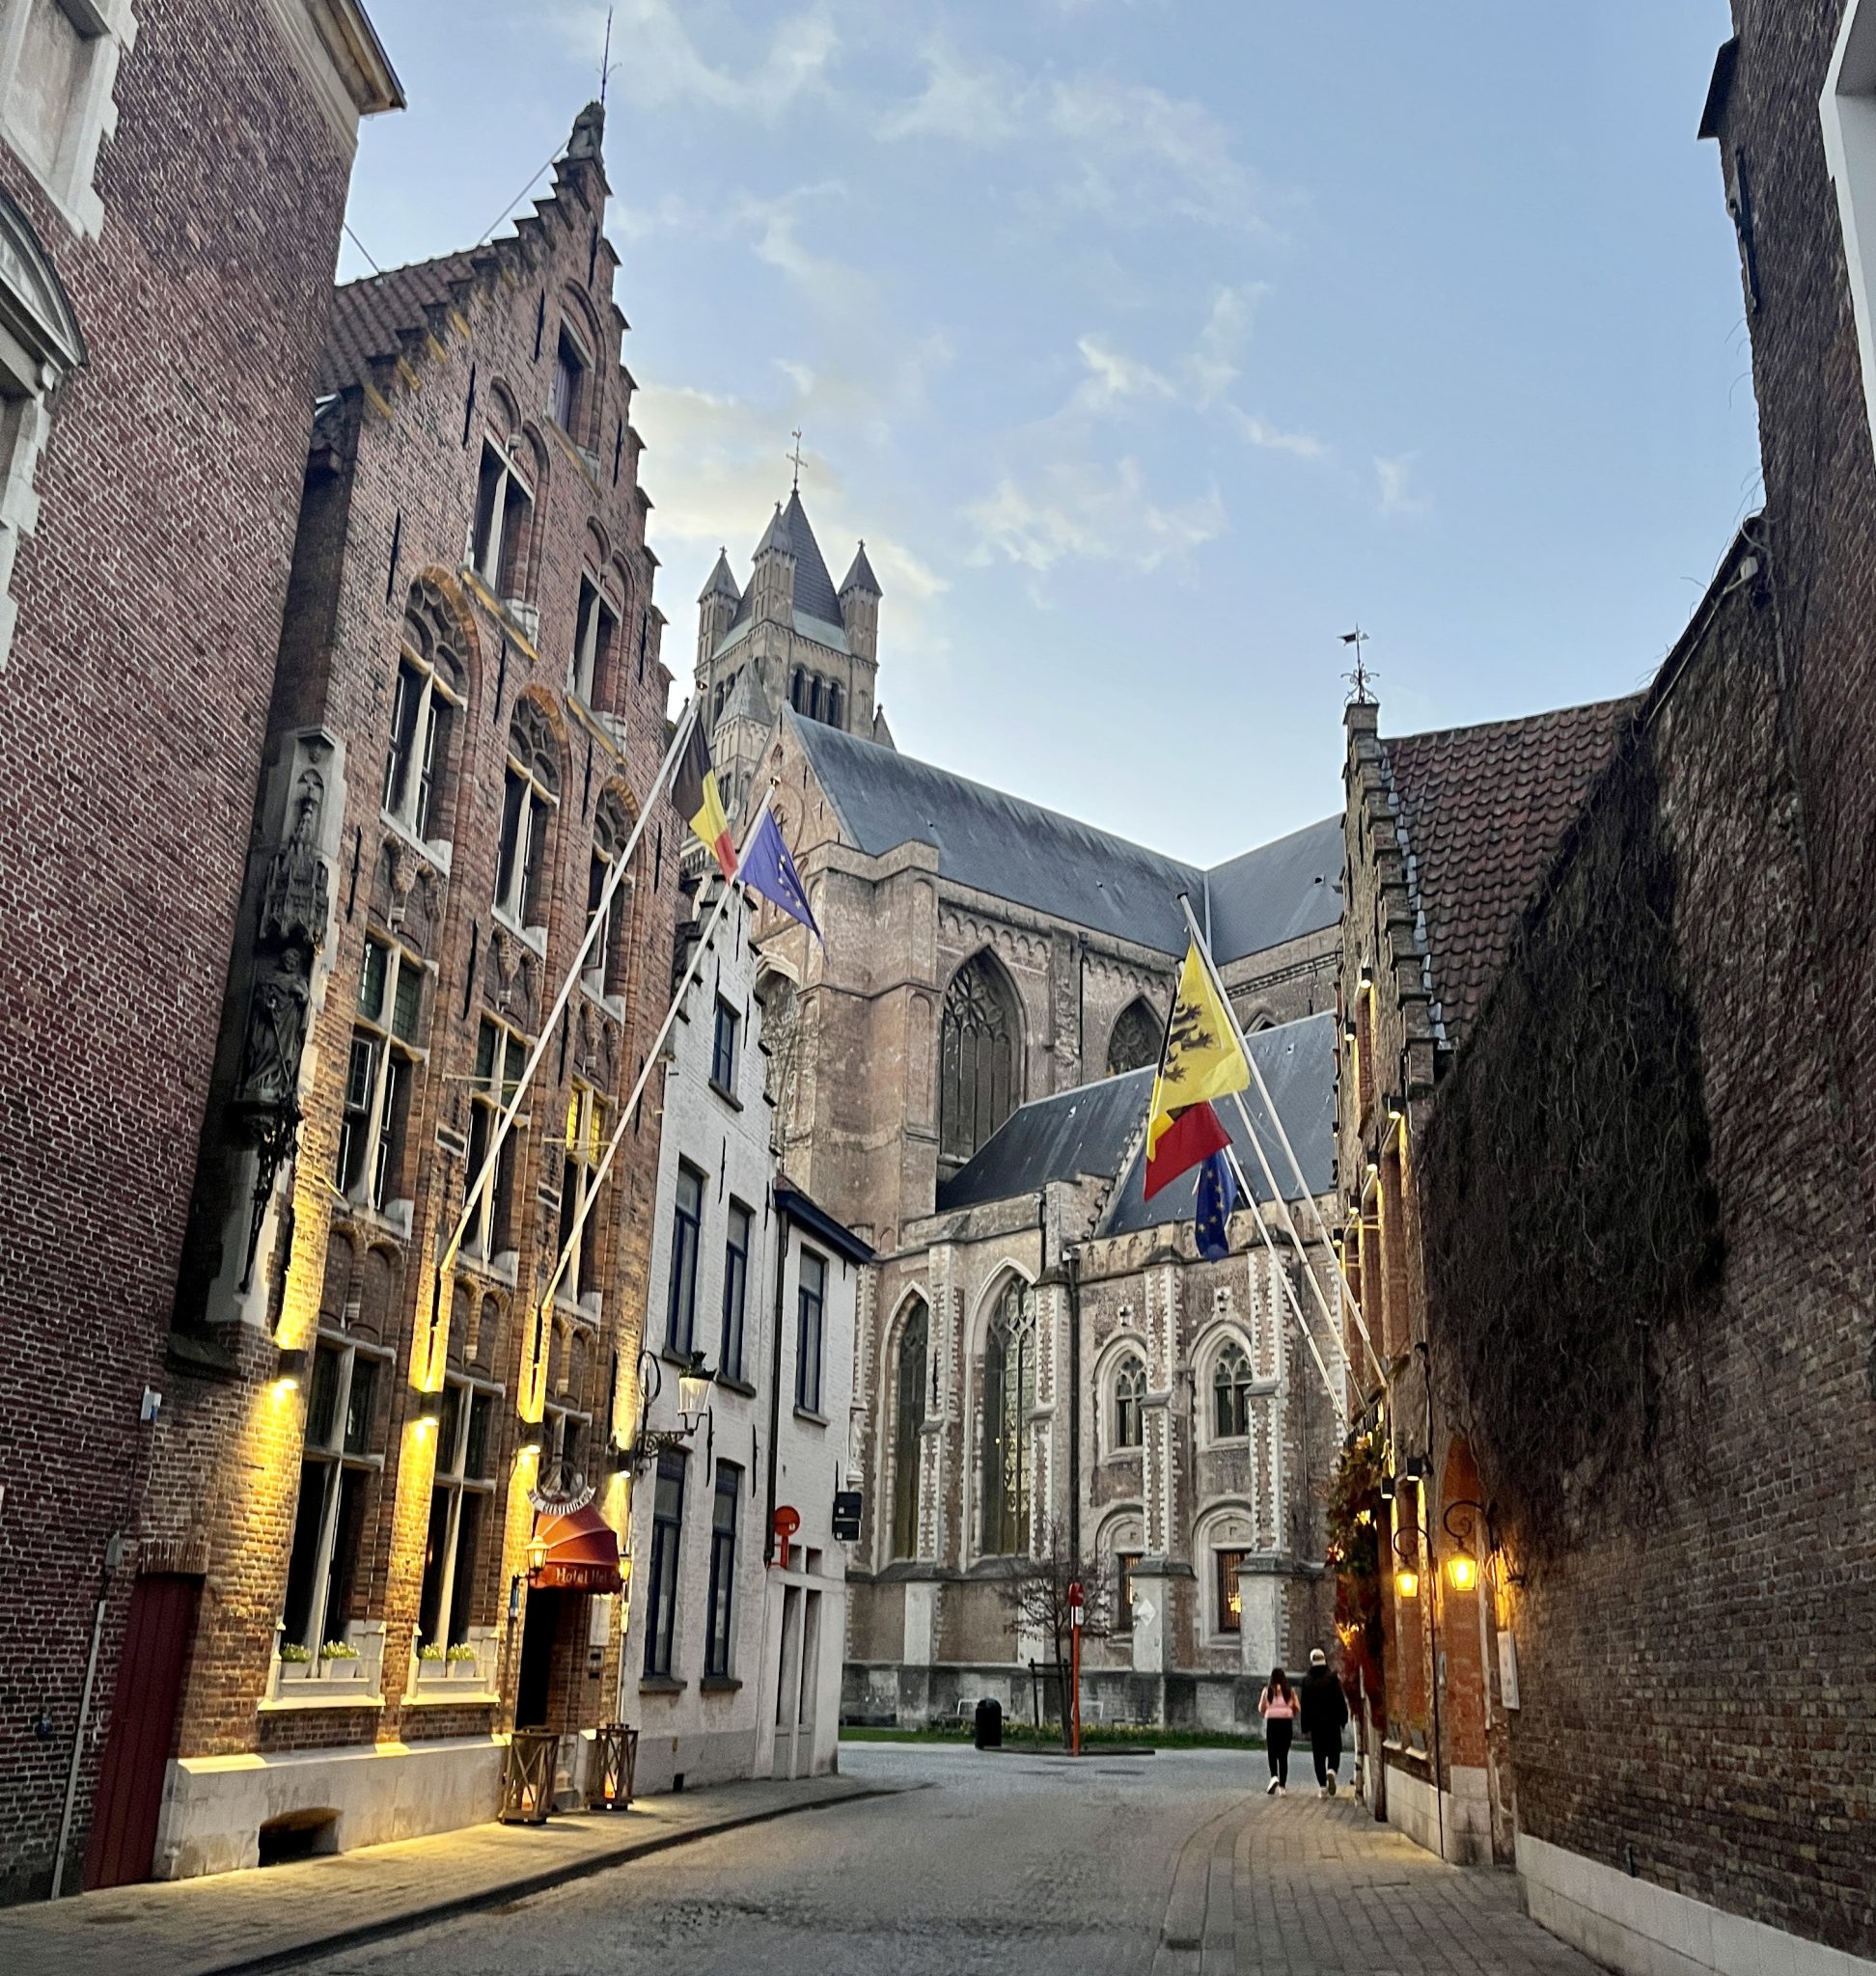 Enjoy the Historic Architecture in Bruge